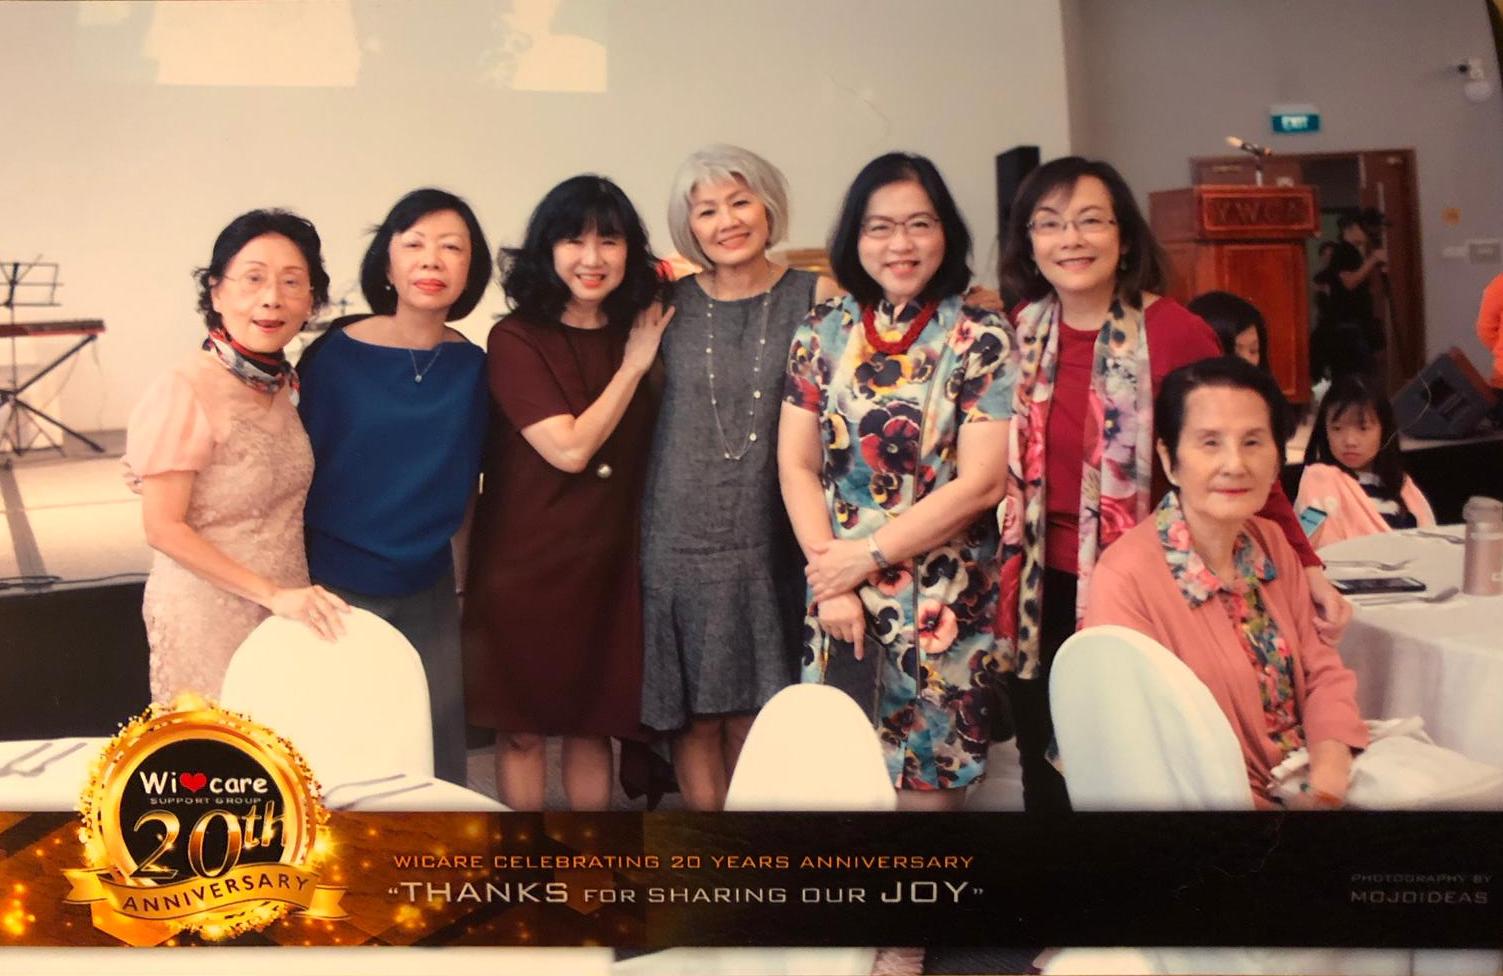 Esther (centre, in grey) with some women in her prayer group at Wicare's 20th Anniversary celebration in 2018.